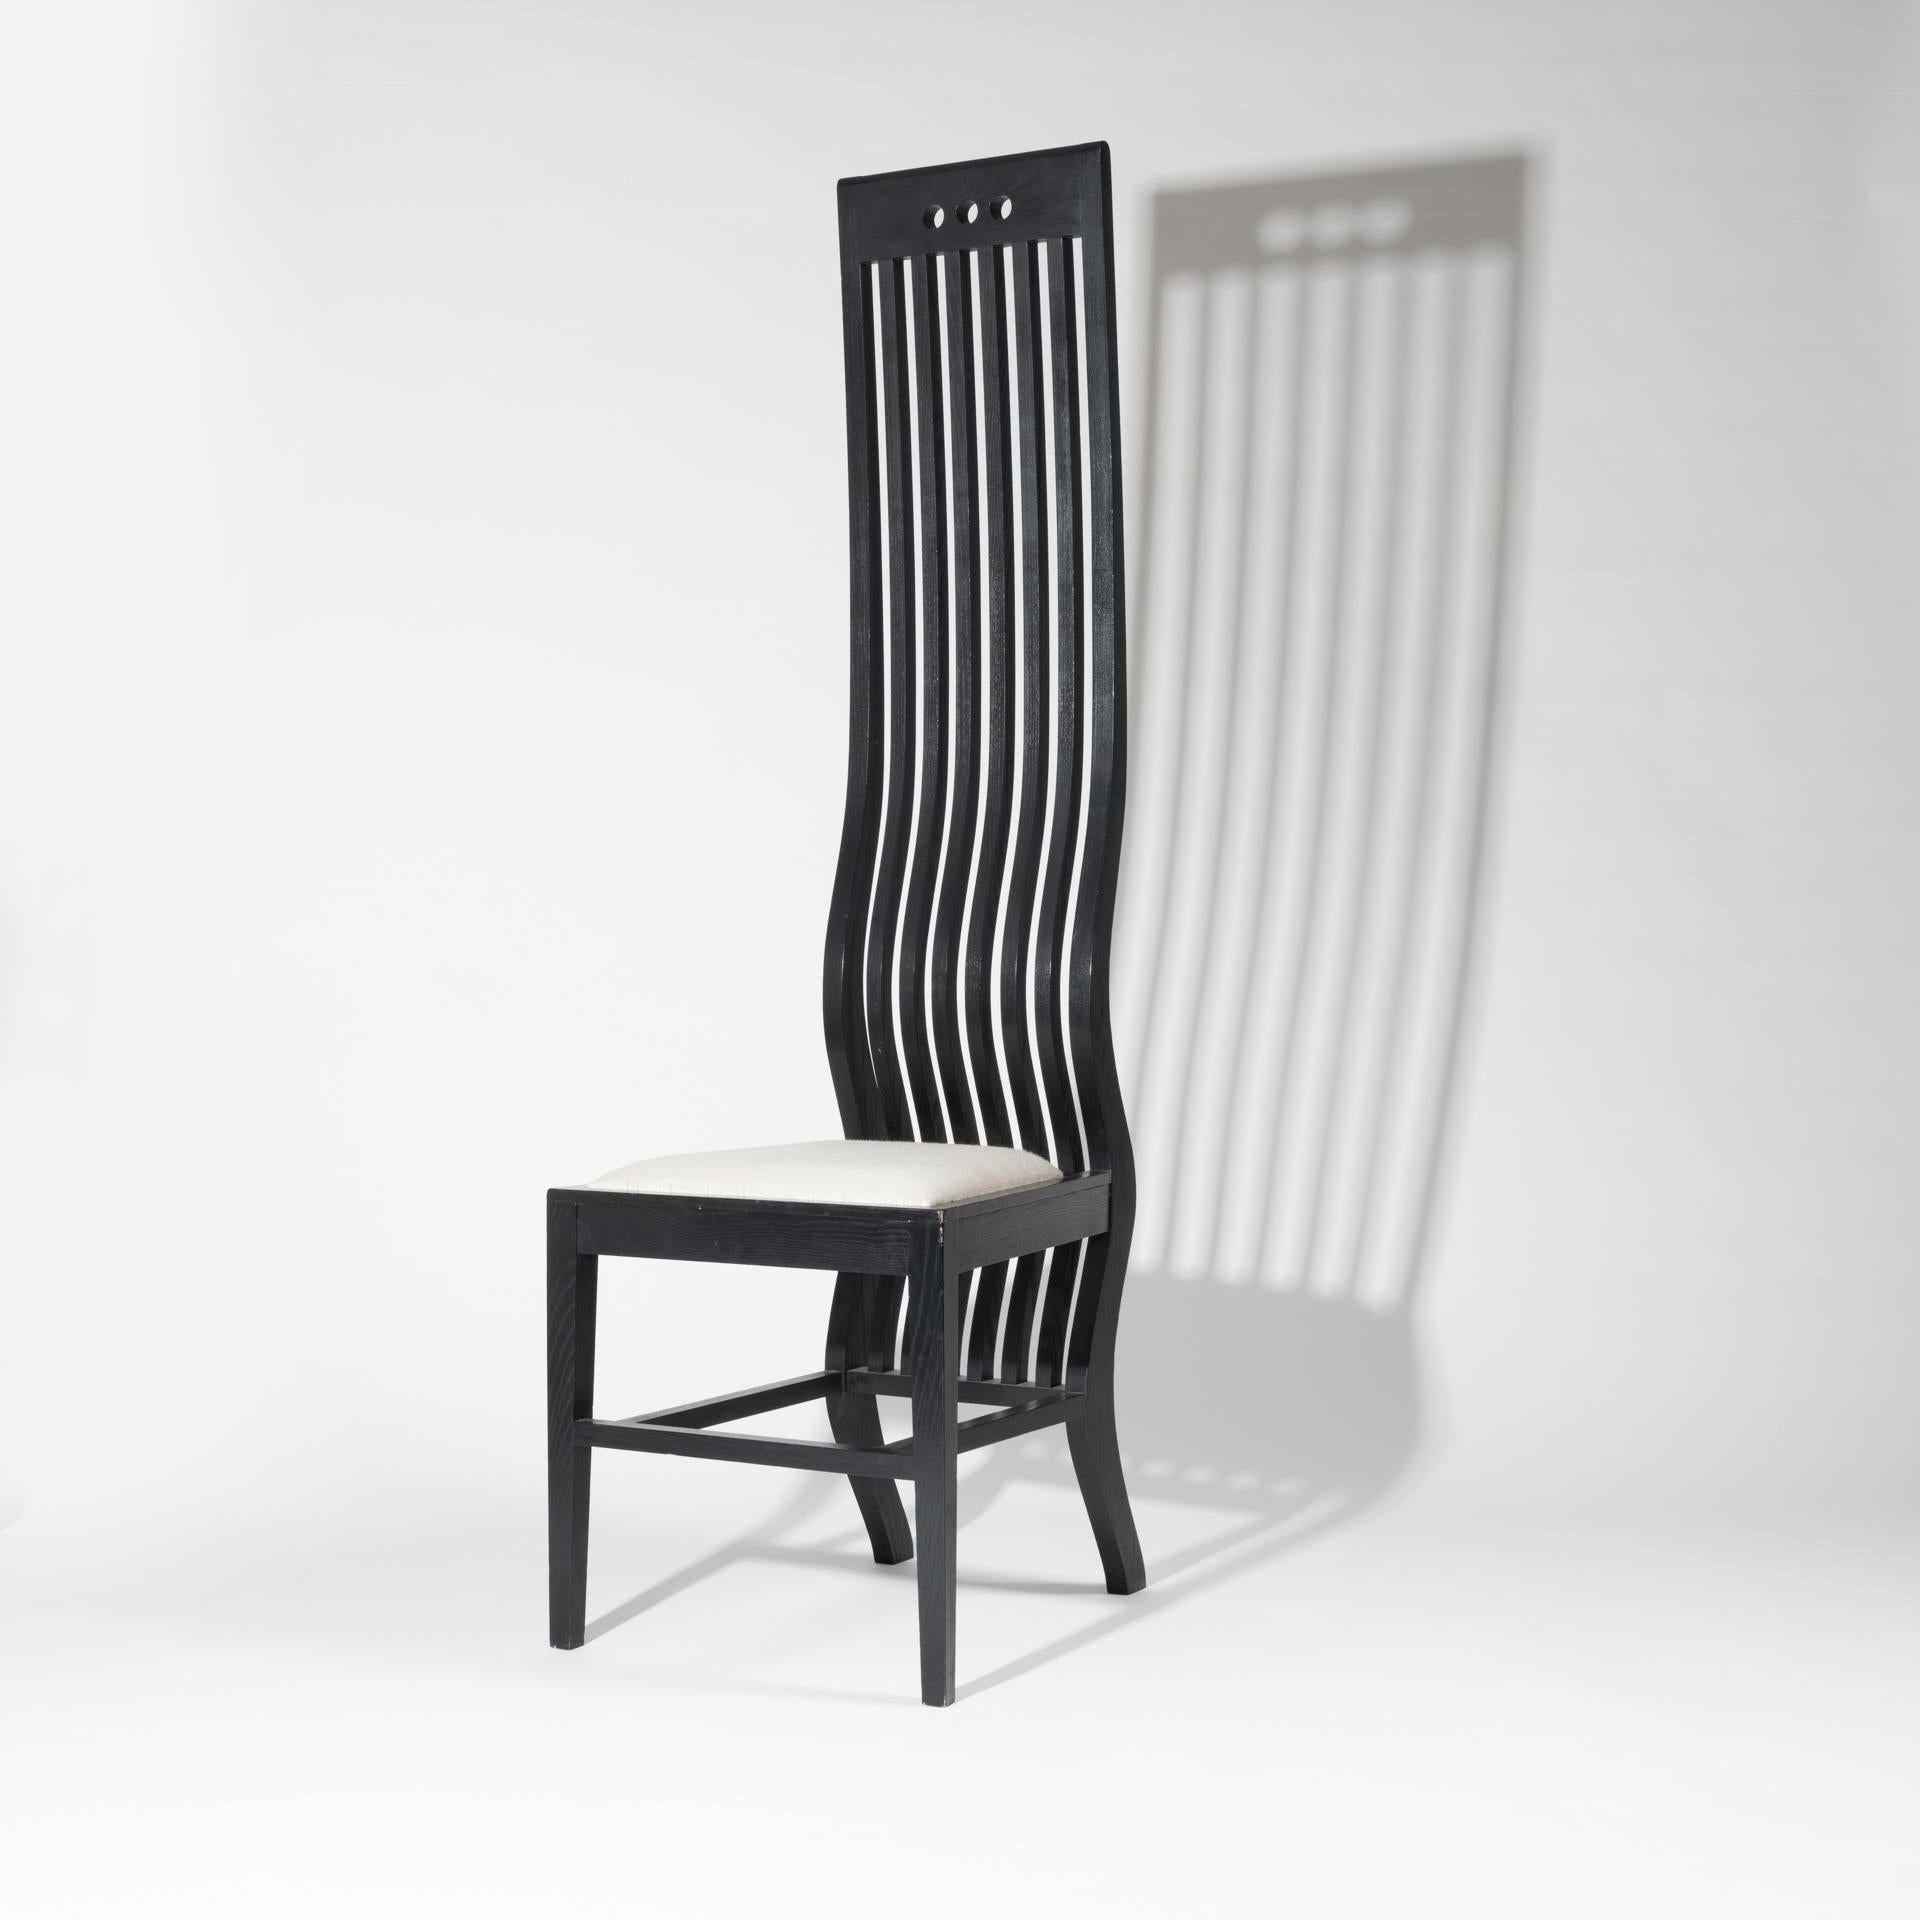 Japanese Pair of Marilyn Chairs by Arata Isozaki  For Sale